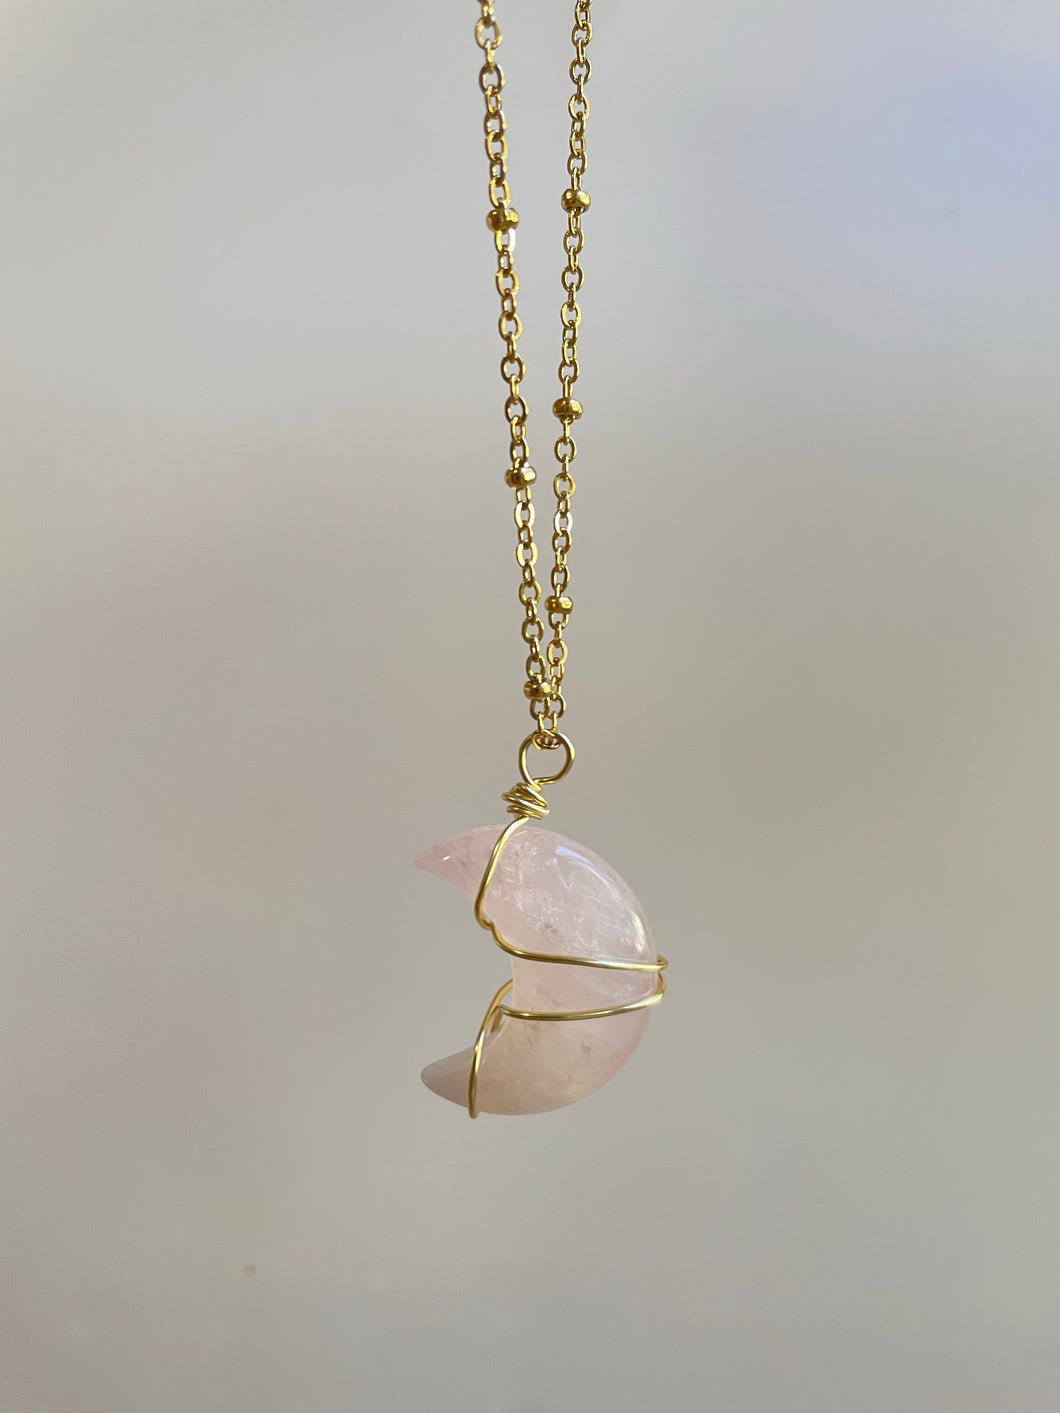 Handmade intentional conscious crystal jewellery Sydney Rose Quartz wire wrapped moon necklace